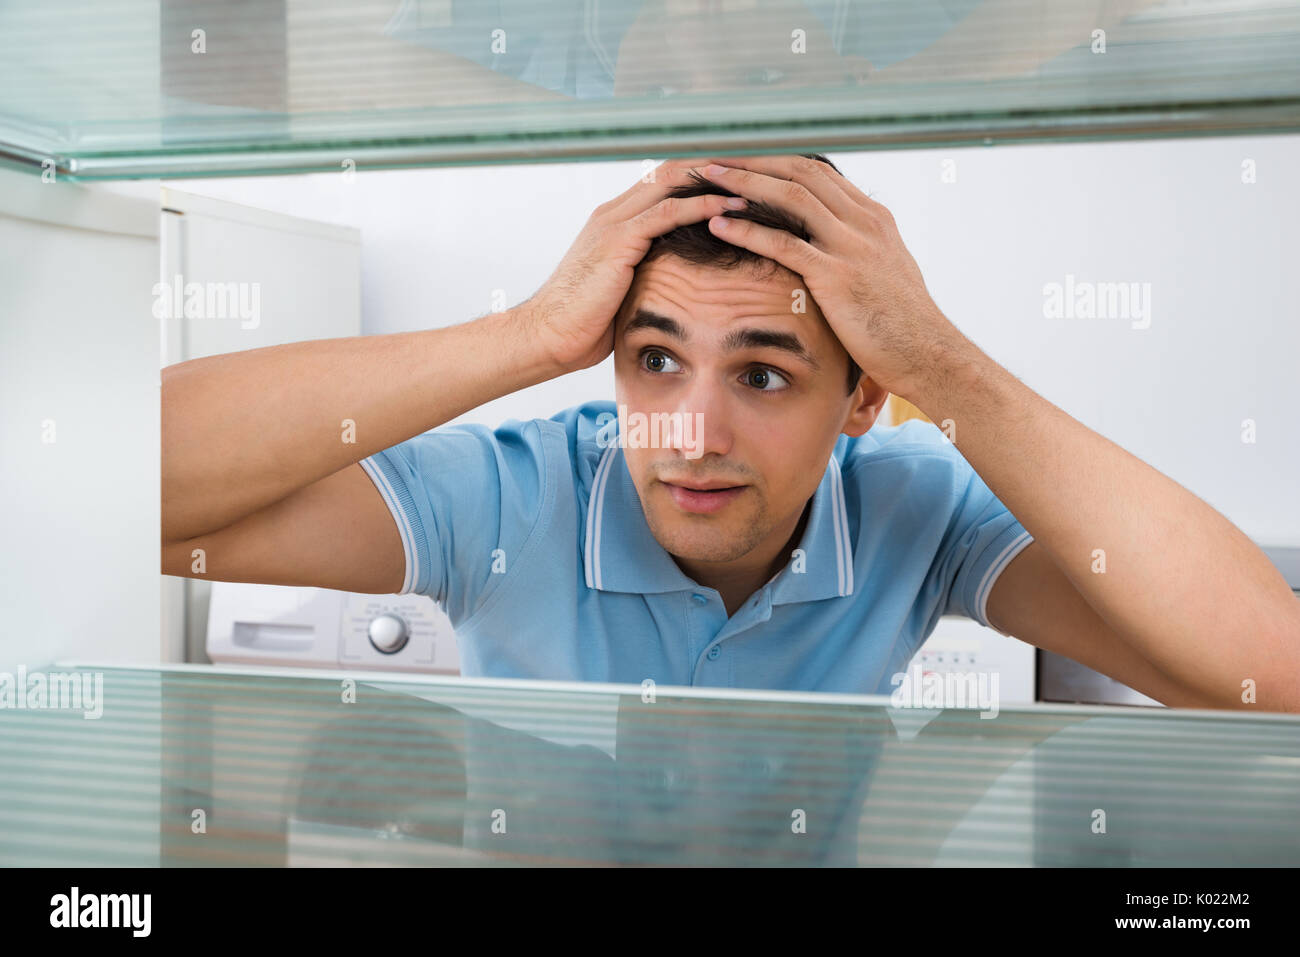 Amazed young man looking into empty refrigerator at home Stock Photo